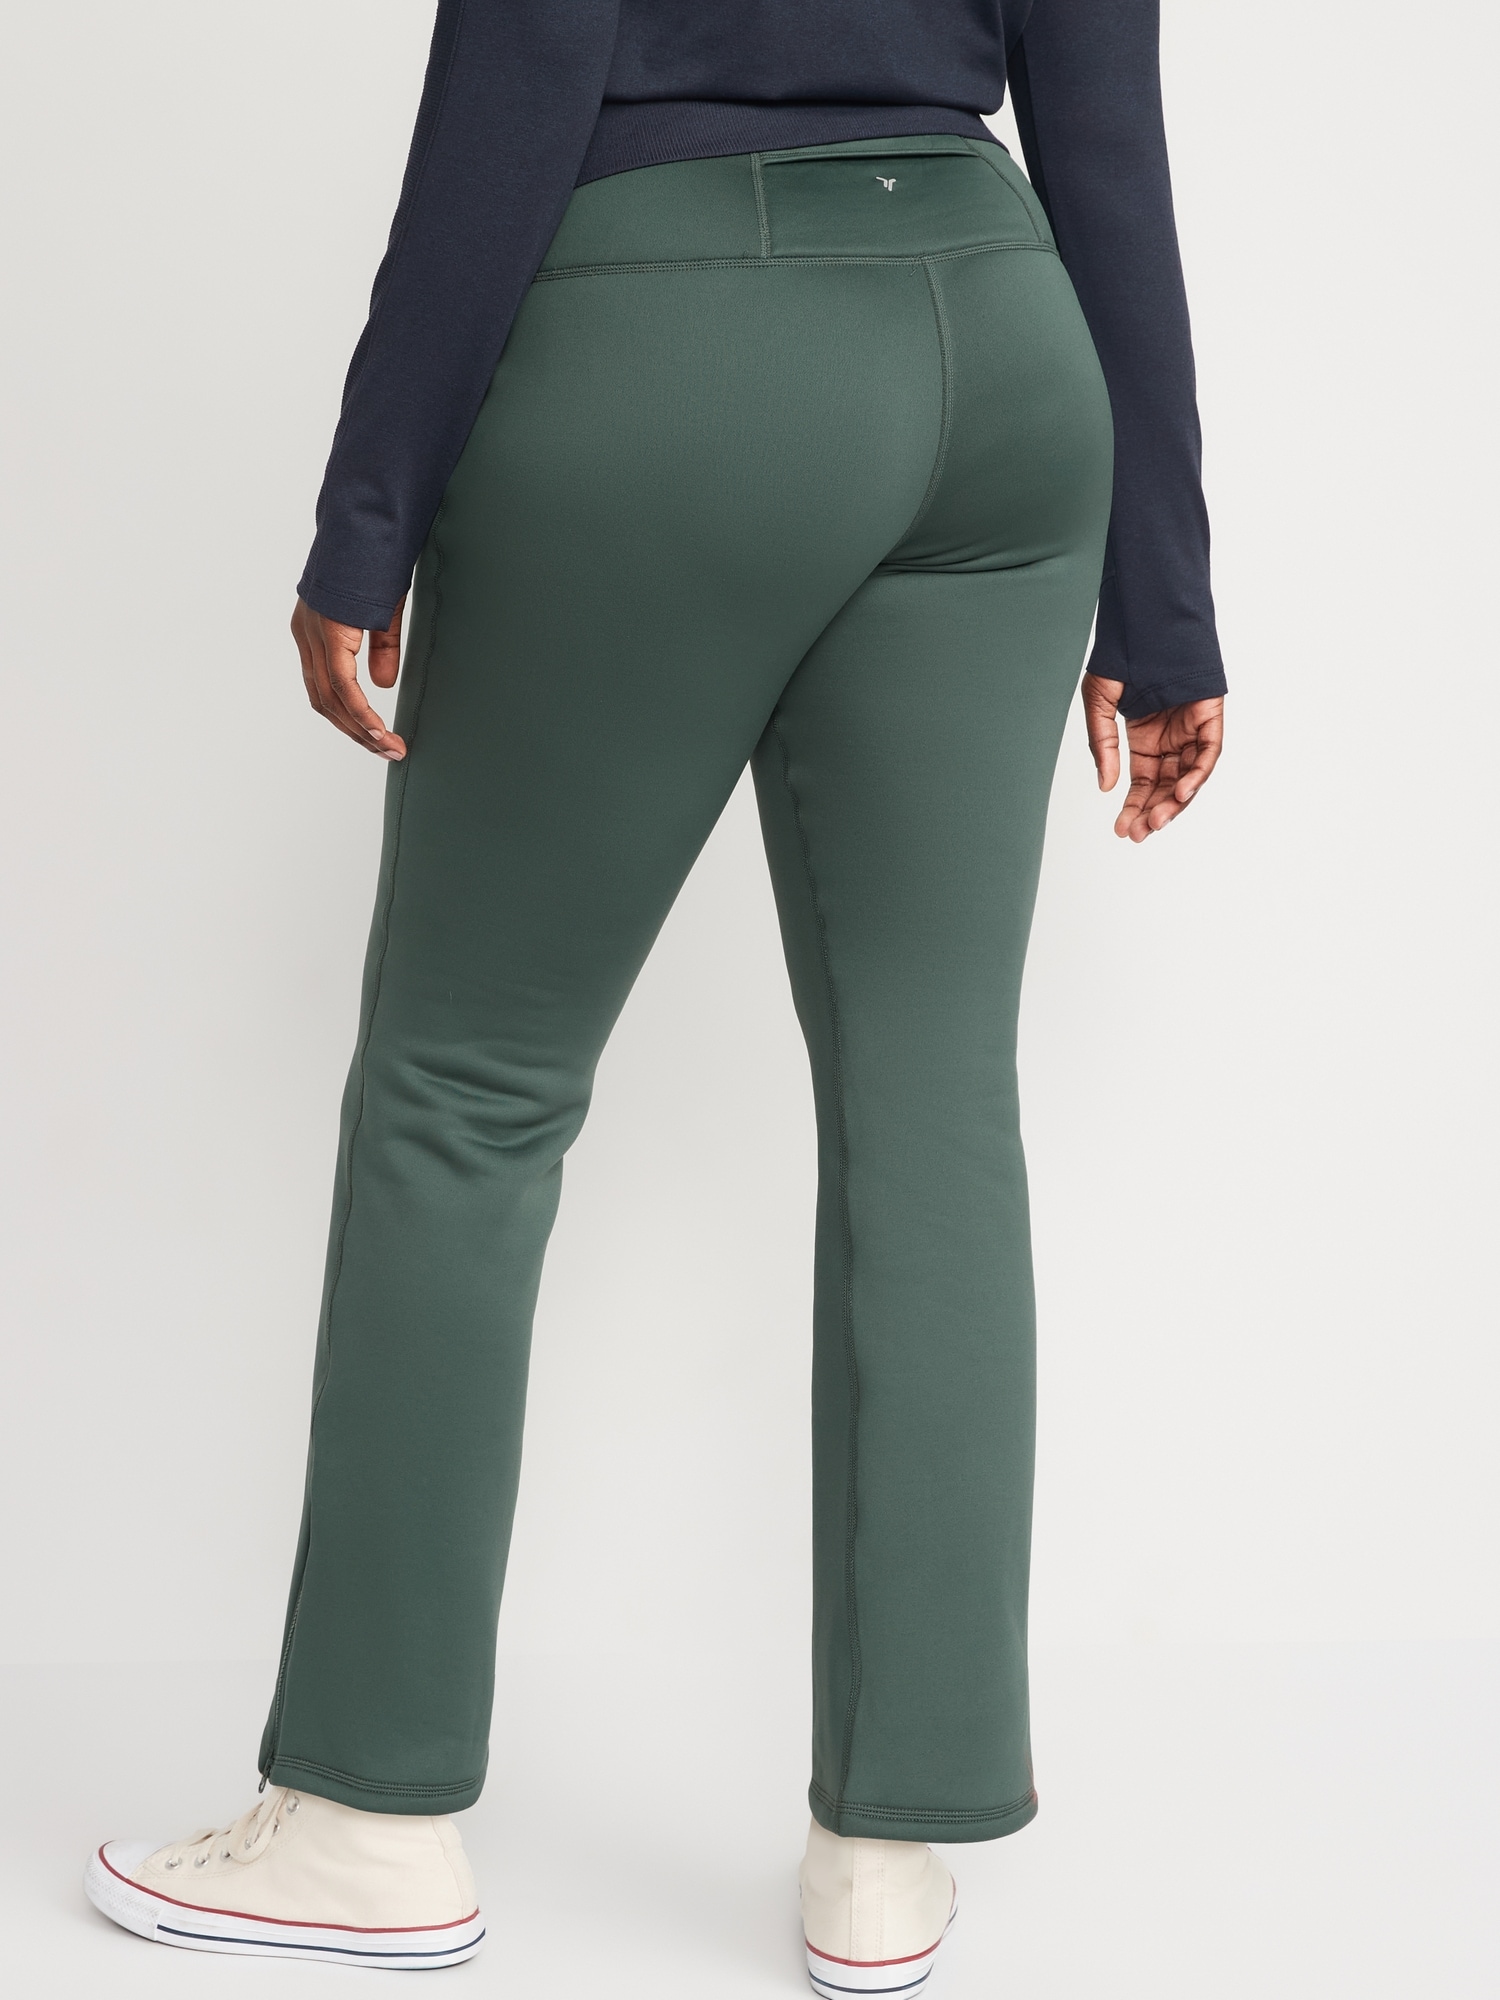 Yoga Pants With Flared Leg, Warm Lining And Pockets